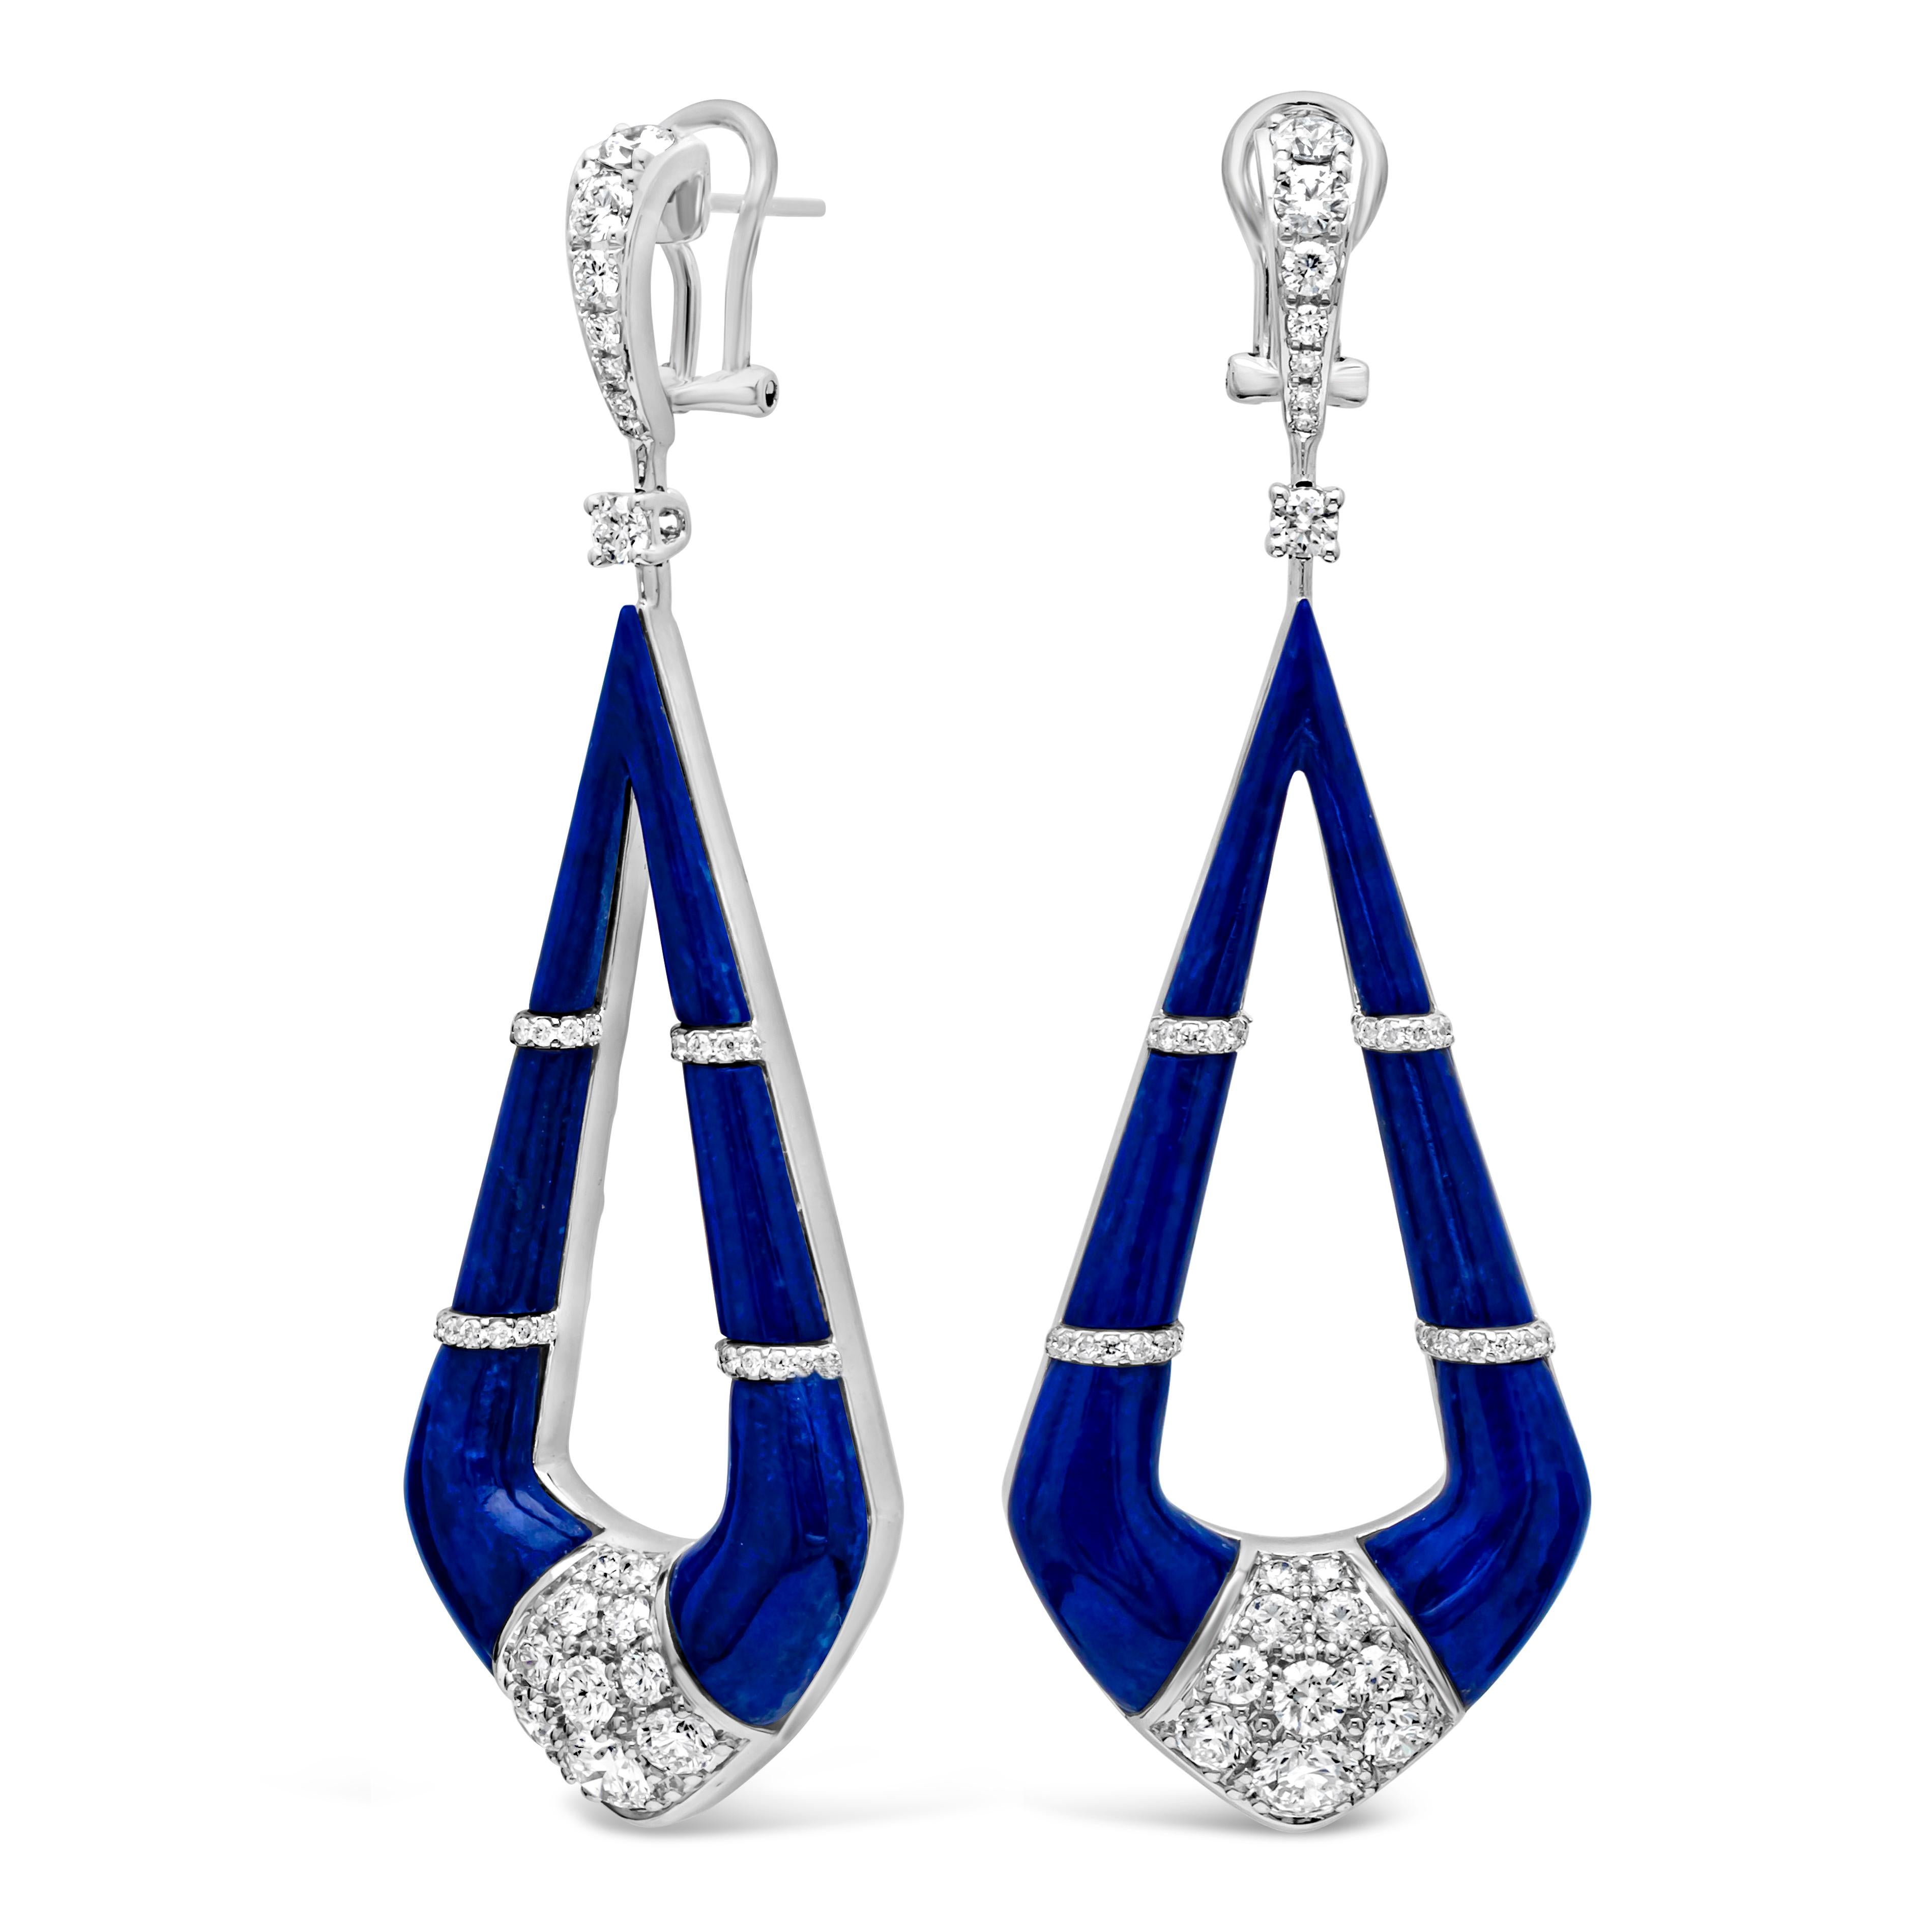 Showcasing a gorgeous and fashionable dangle pietra collection earrings set with beautiful Lapis Lazuli weighing 23.15 carats total, encrusted with brilliant round cut diamonds in a micro-pave setting. Suspended on a round melee diamond set in a